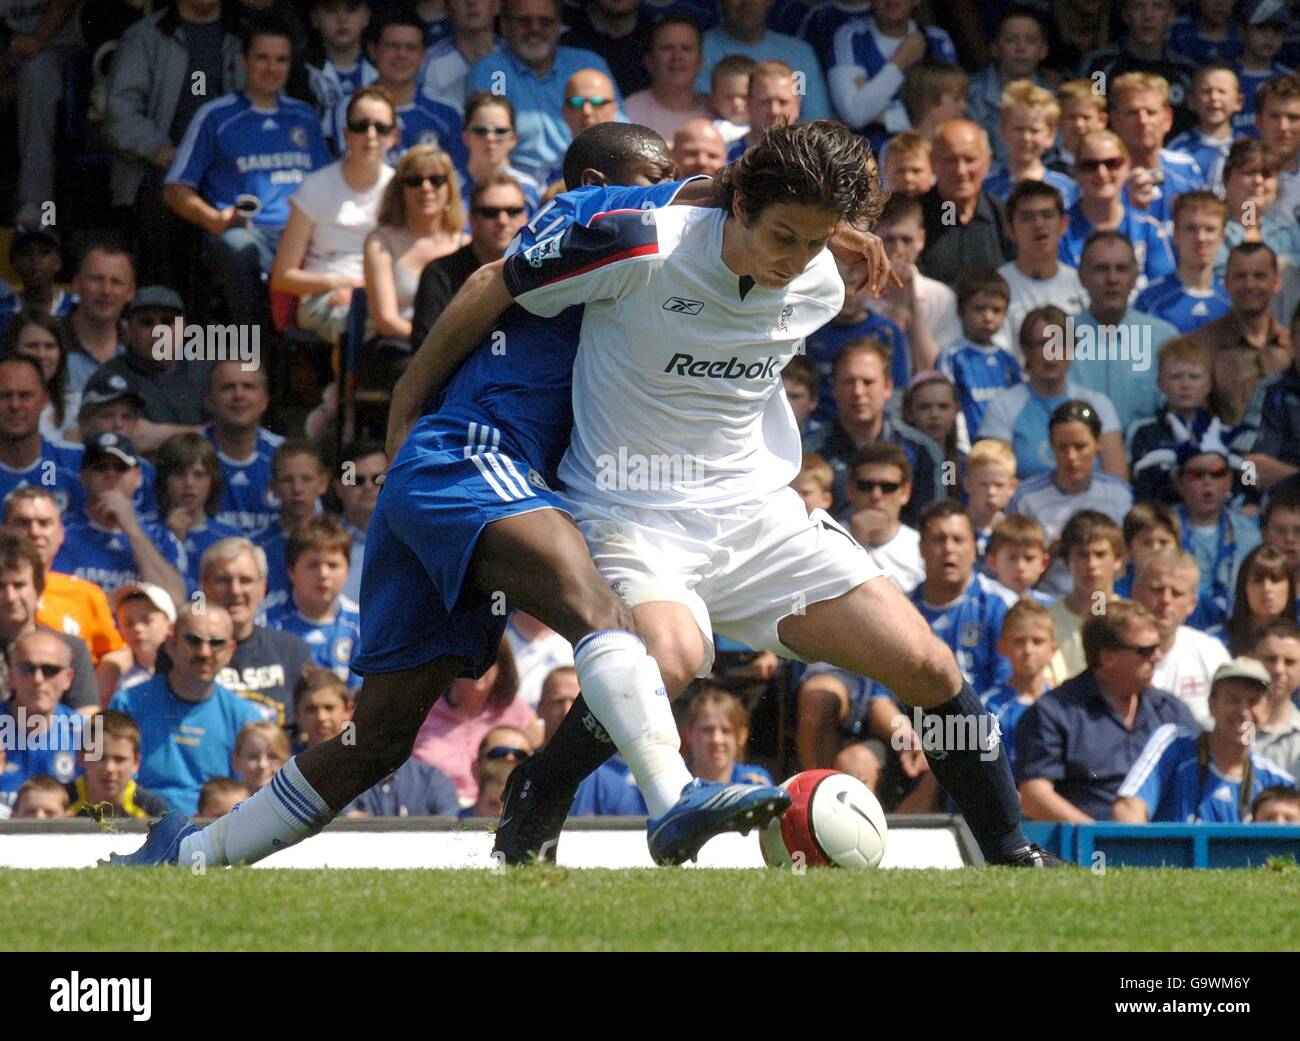 Bolton Wanderers Andranik Teymourian (right) and Chelsea's Shaun Wright-Phillips battle for the ball Stock Photo